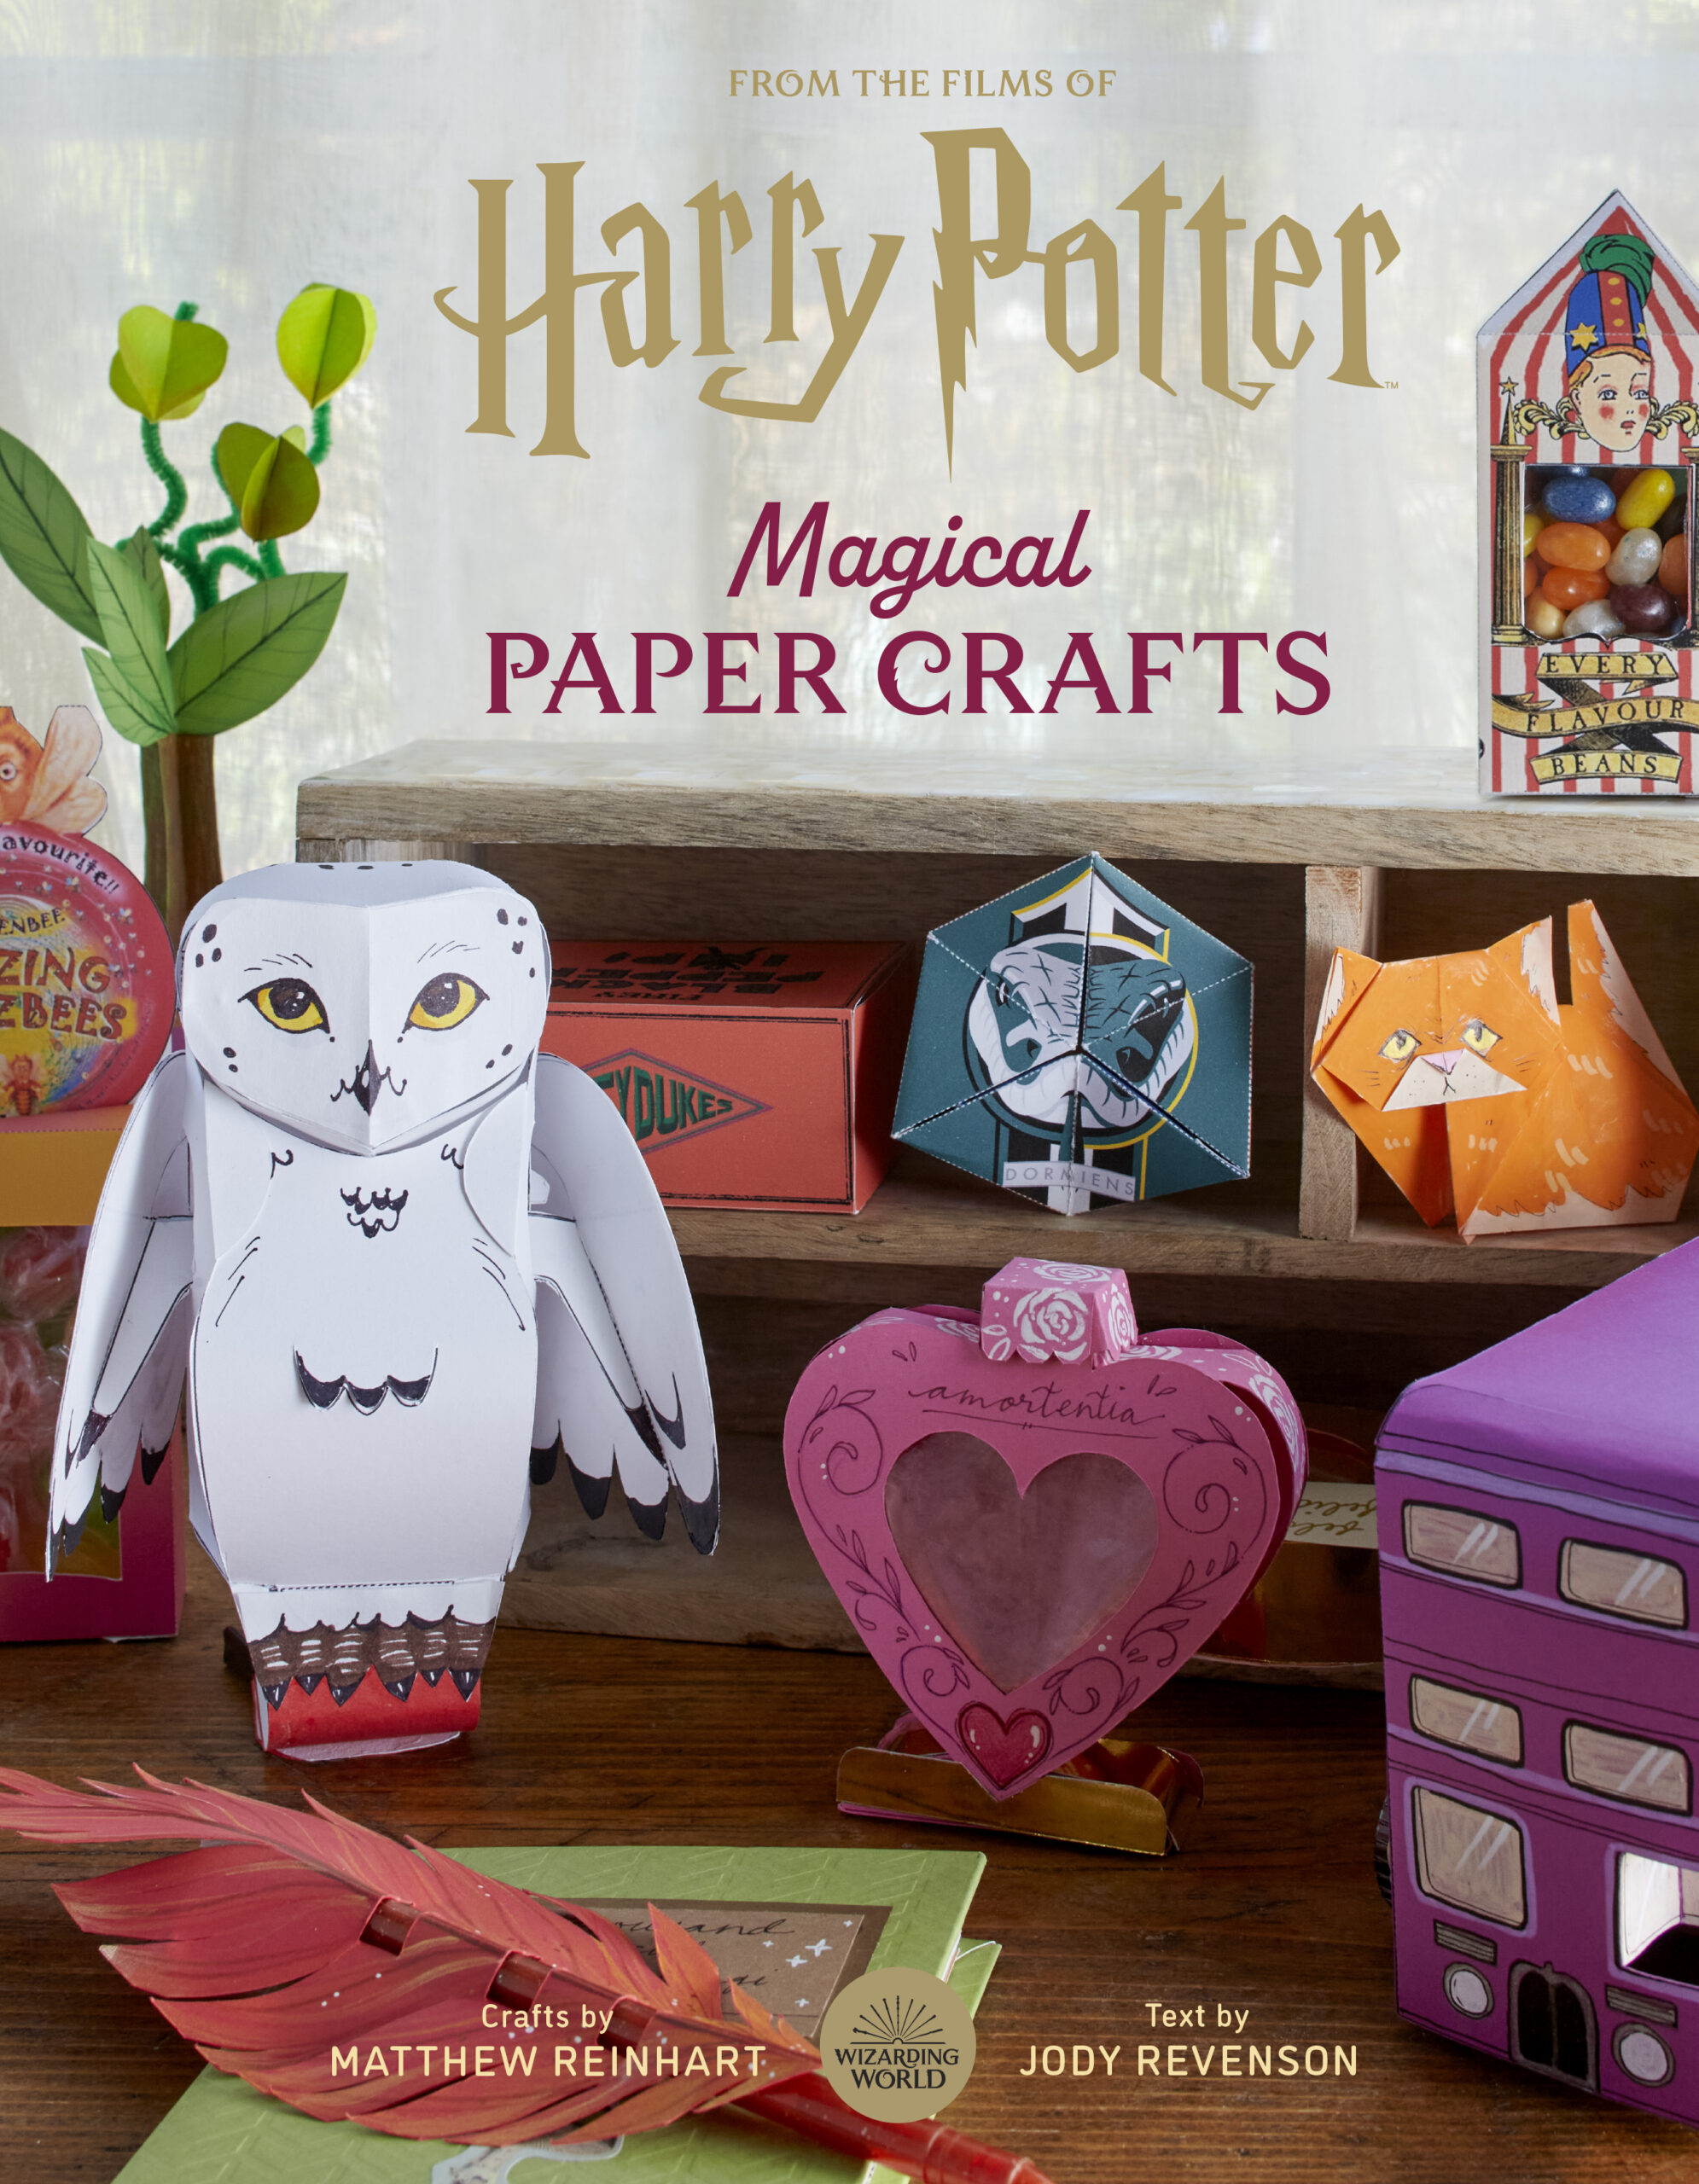 “Harry Potter: Magical Paper Crafts” will be released on October 11.